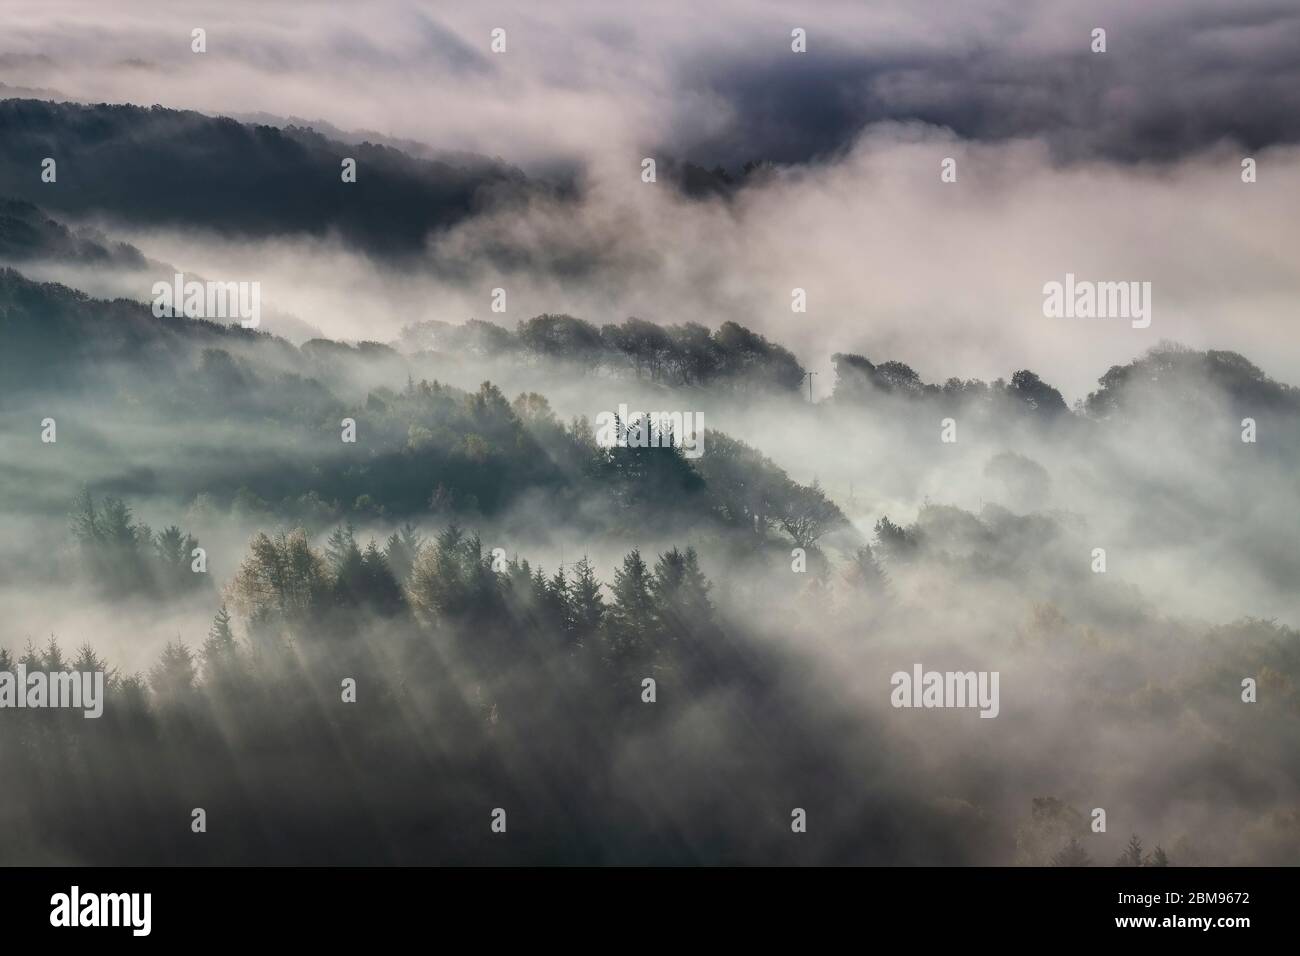 Early Morning Mist and Fog encase Gwydir Forest, near Capel Curig, Snowdonia National Park, North Wales, UK Stock Photo